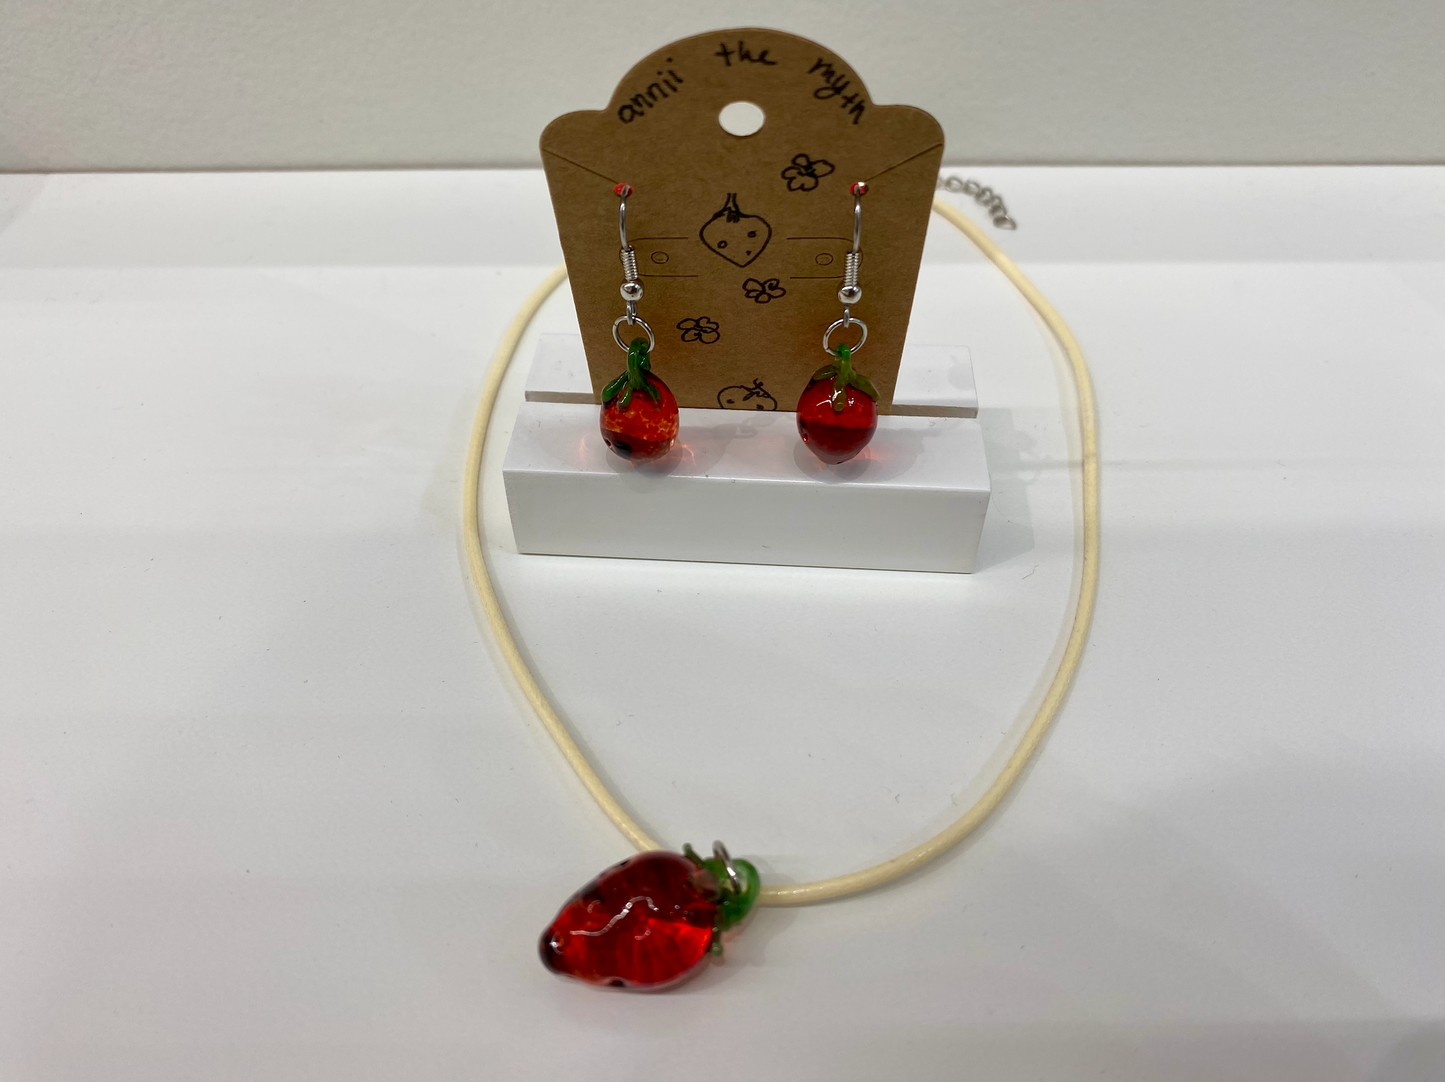 Handmade Glass Strawberry Earrings & Necklaces by local artist Annii the Myth